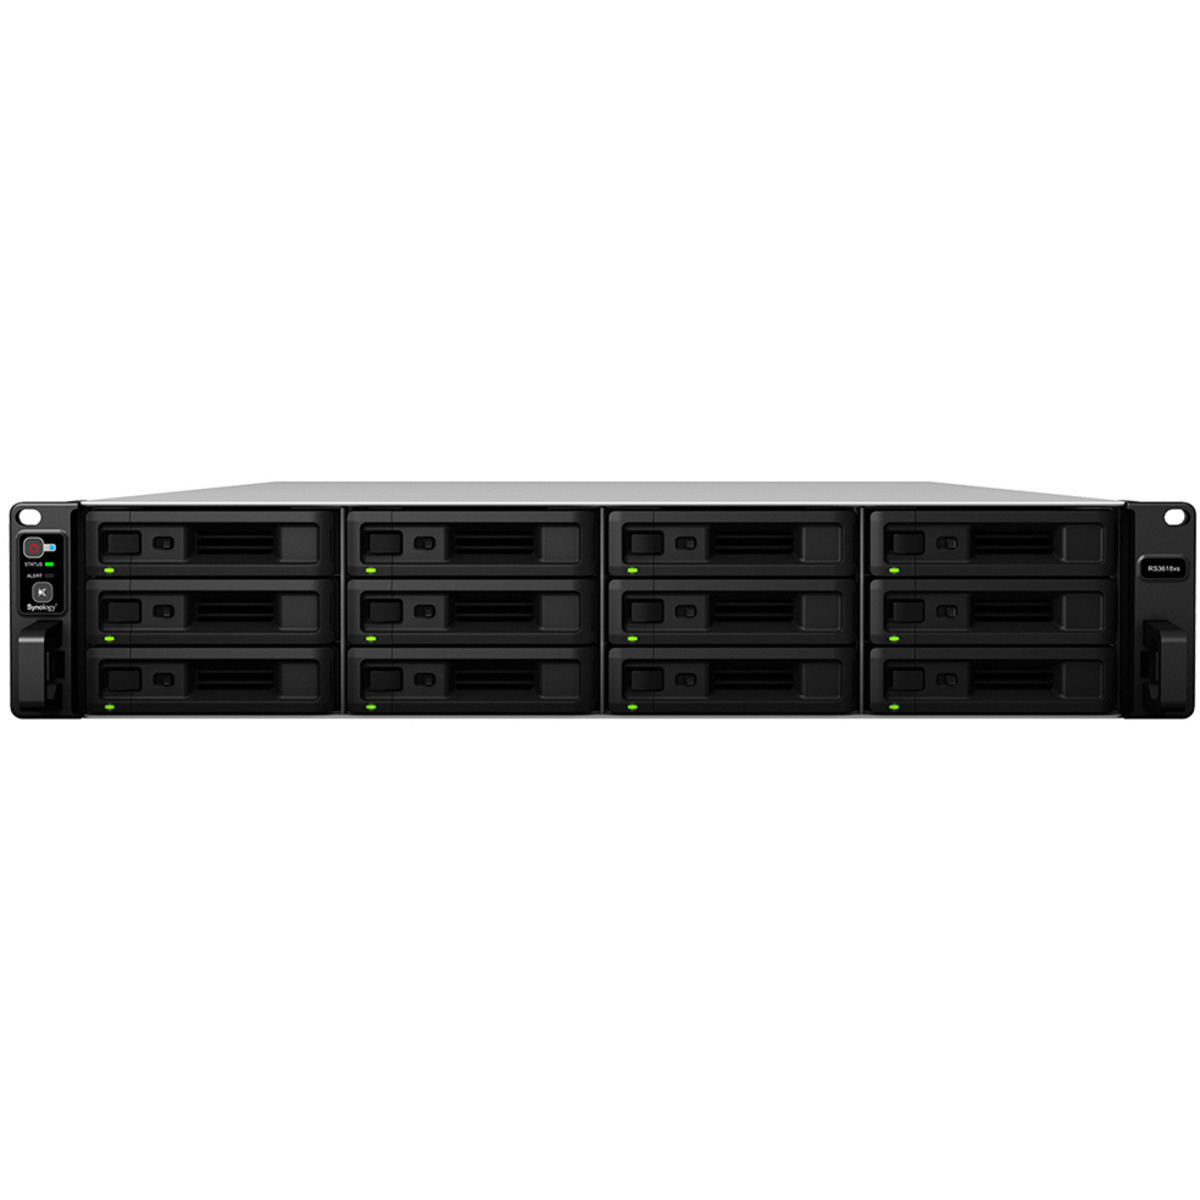 Synology RackStation RS3618xs 160tb 12-Bay RackMount Large Business / Enterprise NAS - Network Attached Storage Device 10x16tb Western Digital Red Pro WD161KFGX 3.5 7200rpm SATA 6Gb/s HDD NAS Class Drives Installed - Burn-In Tested RackStation RS3618xs